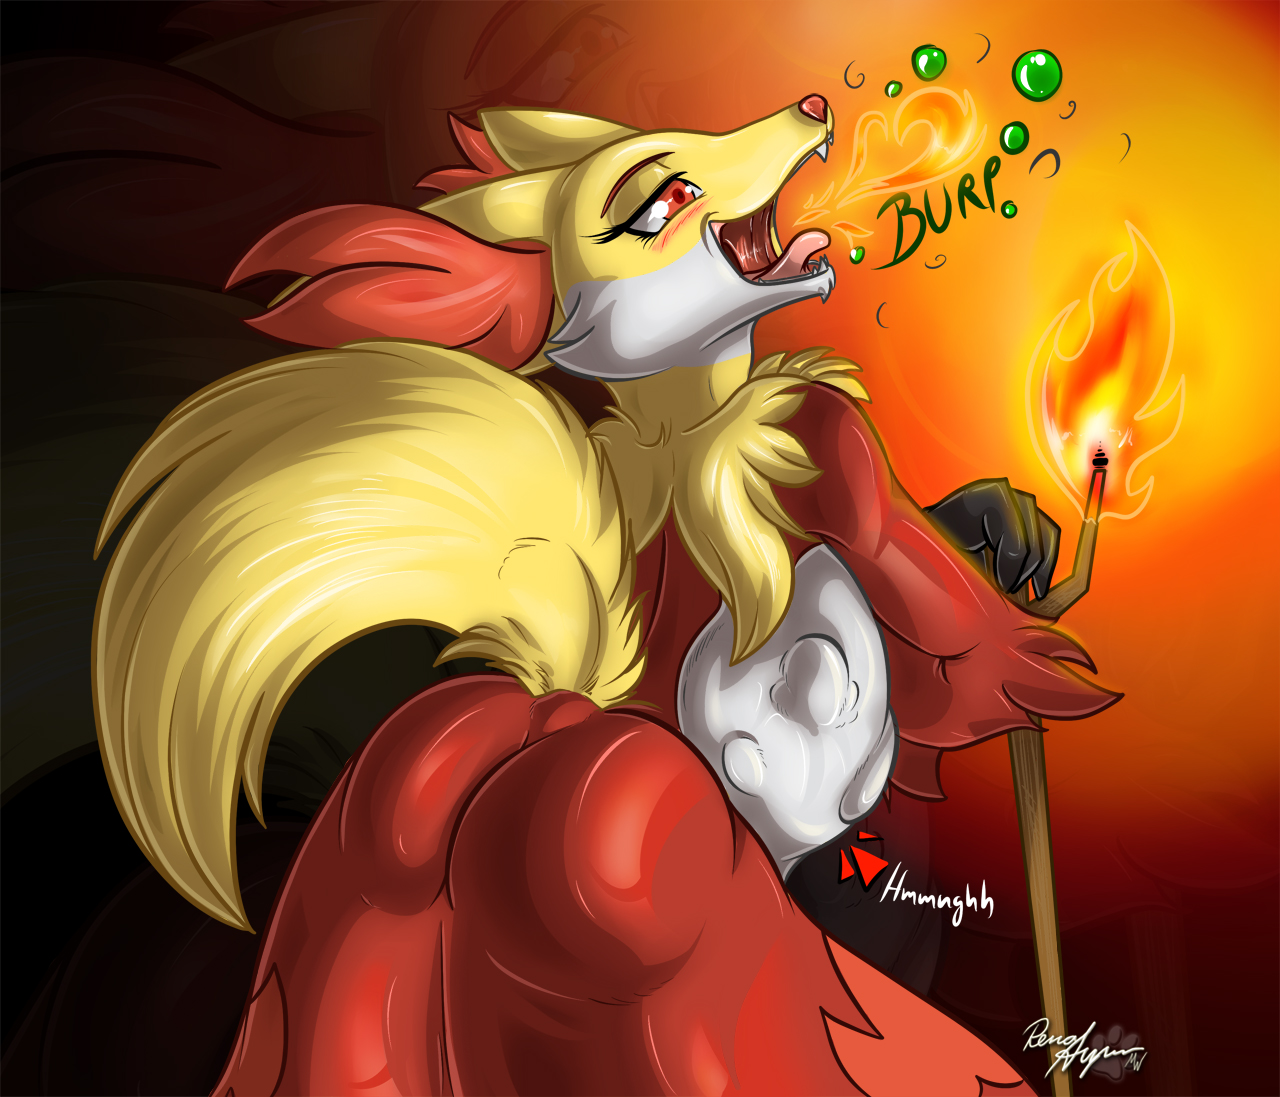 Delphox gained 1987 Exp. 